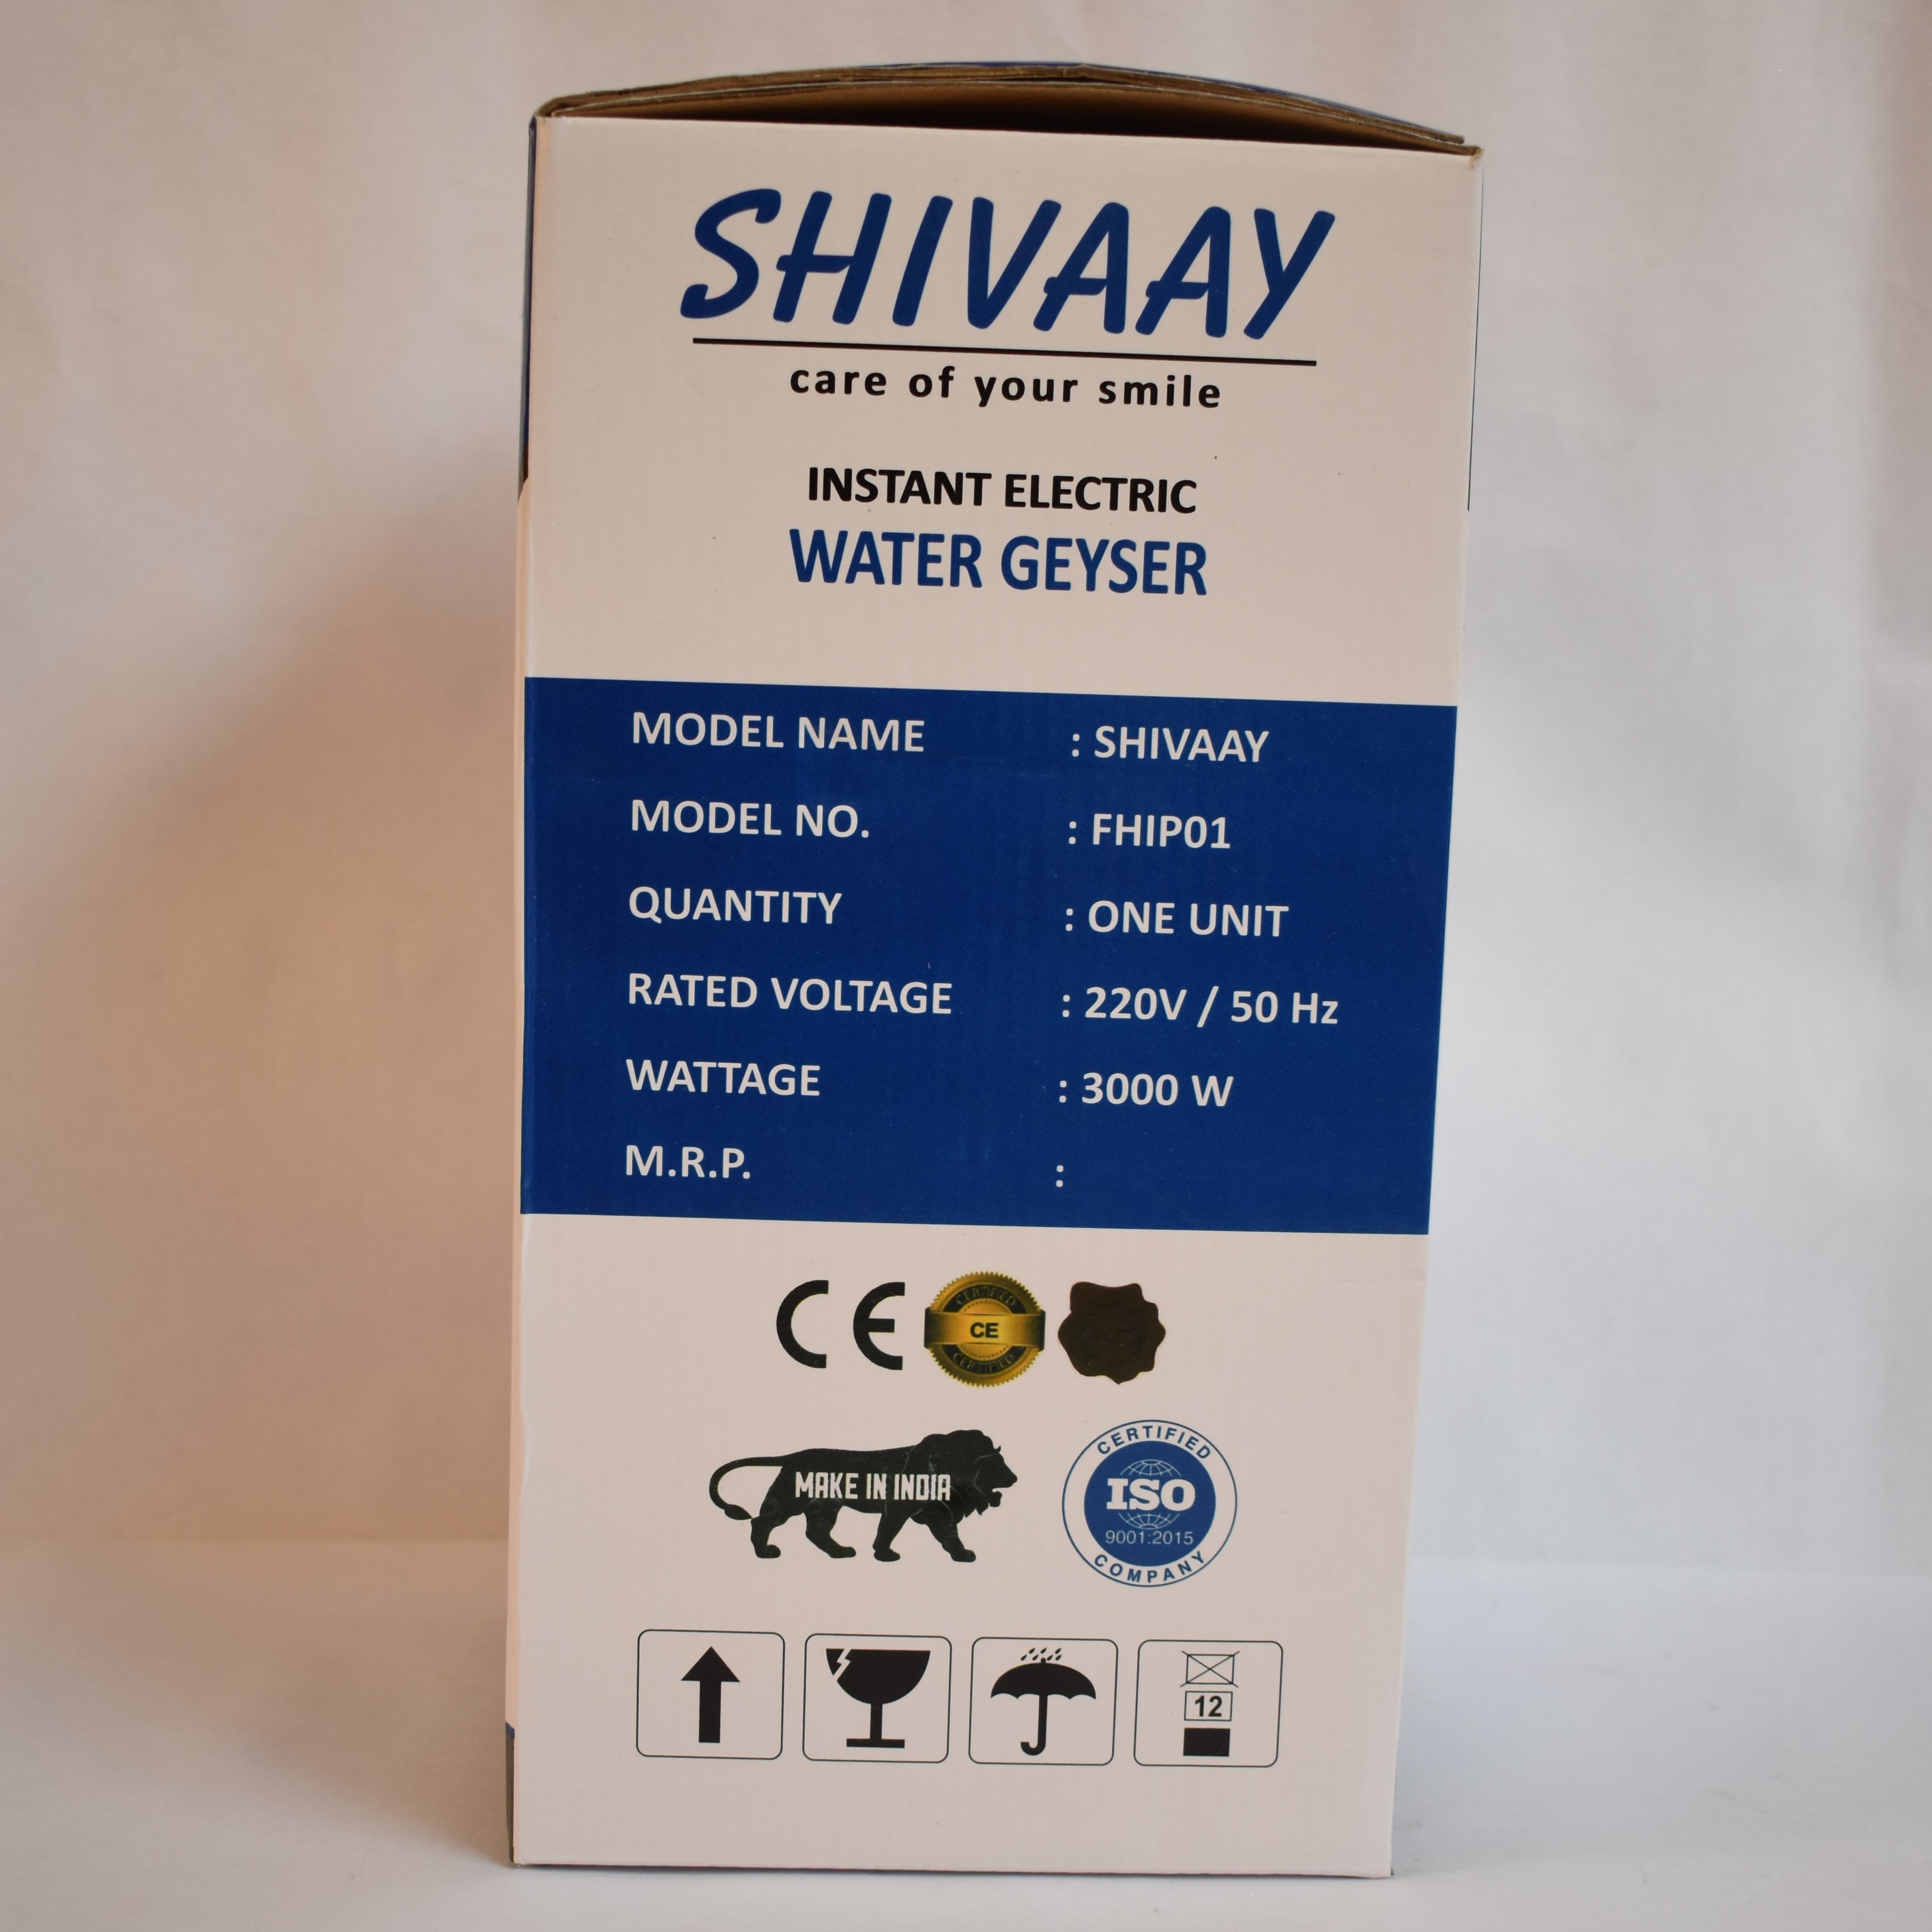 Shivaay Instant Electric Water Geyser